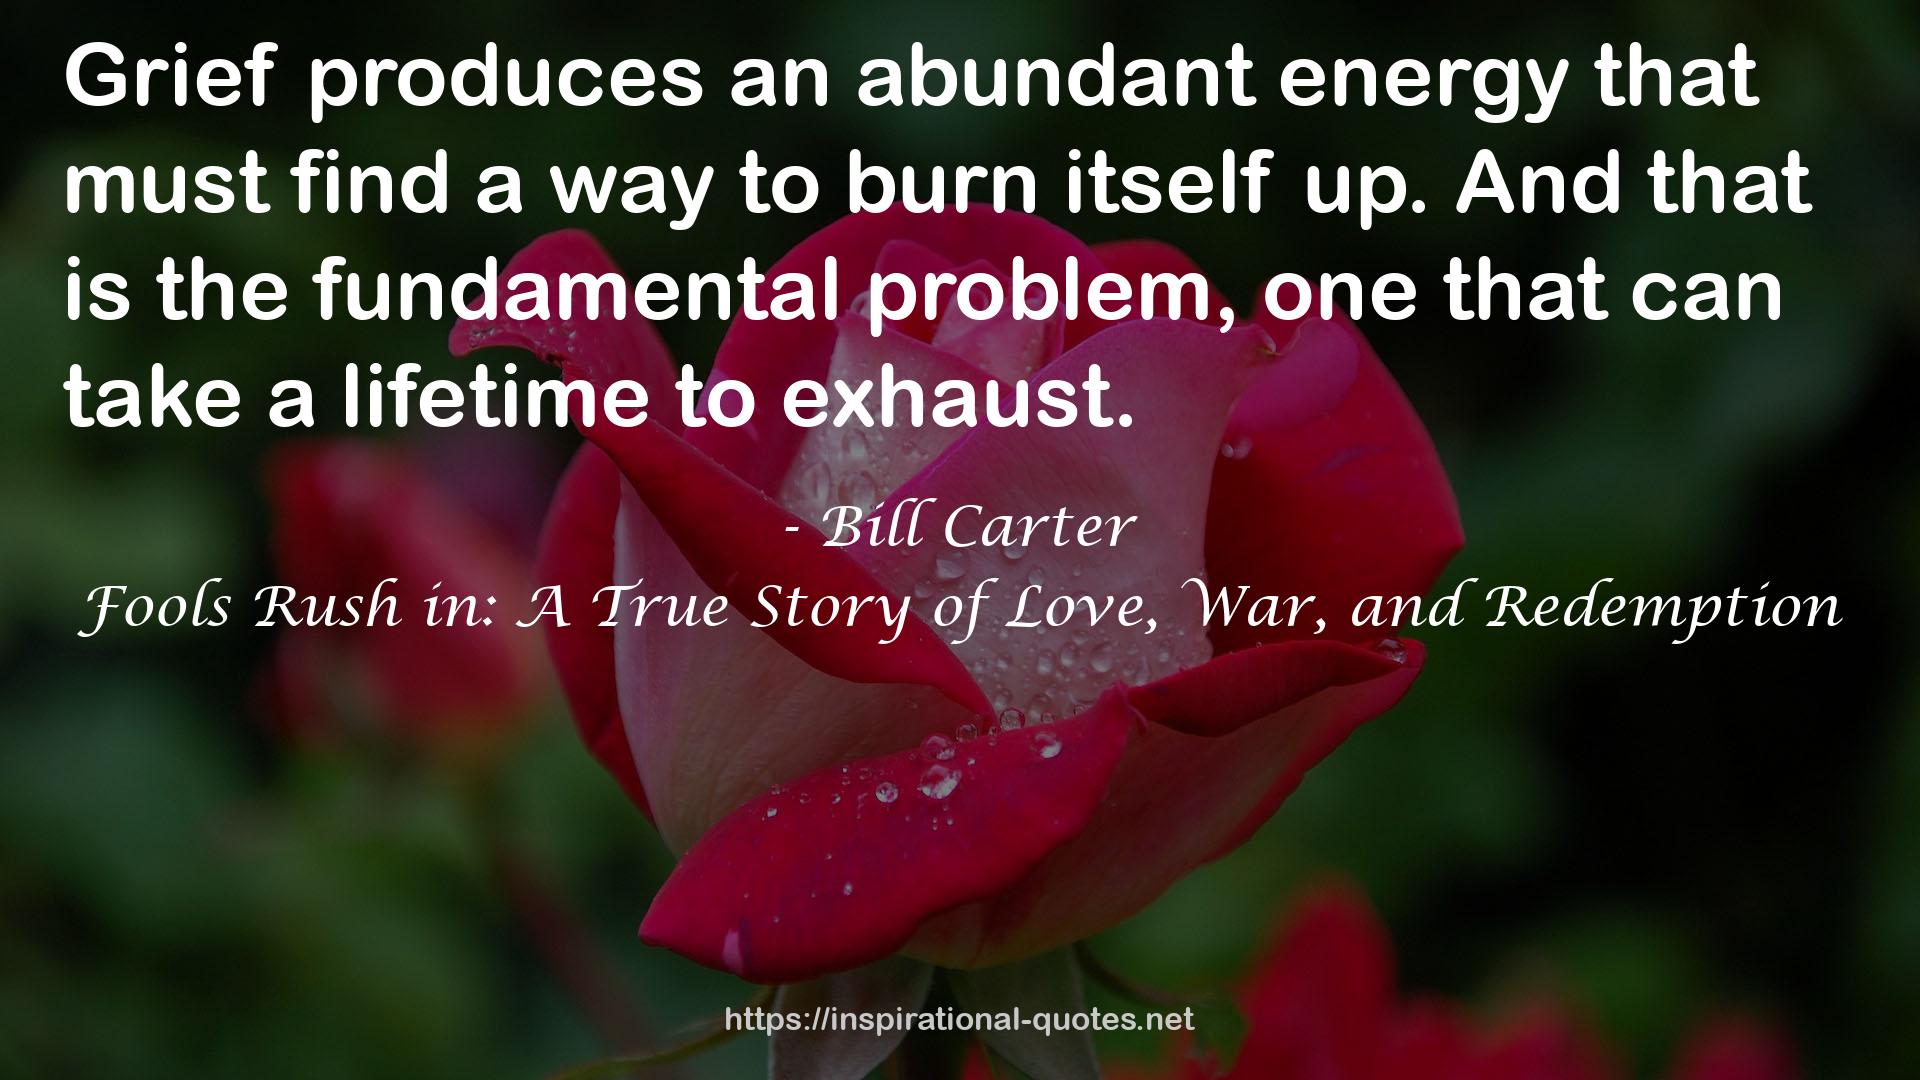 Bill Carter QUOTES